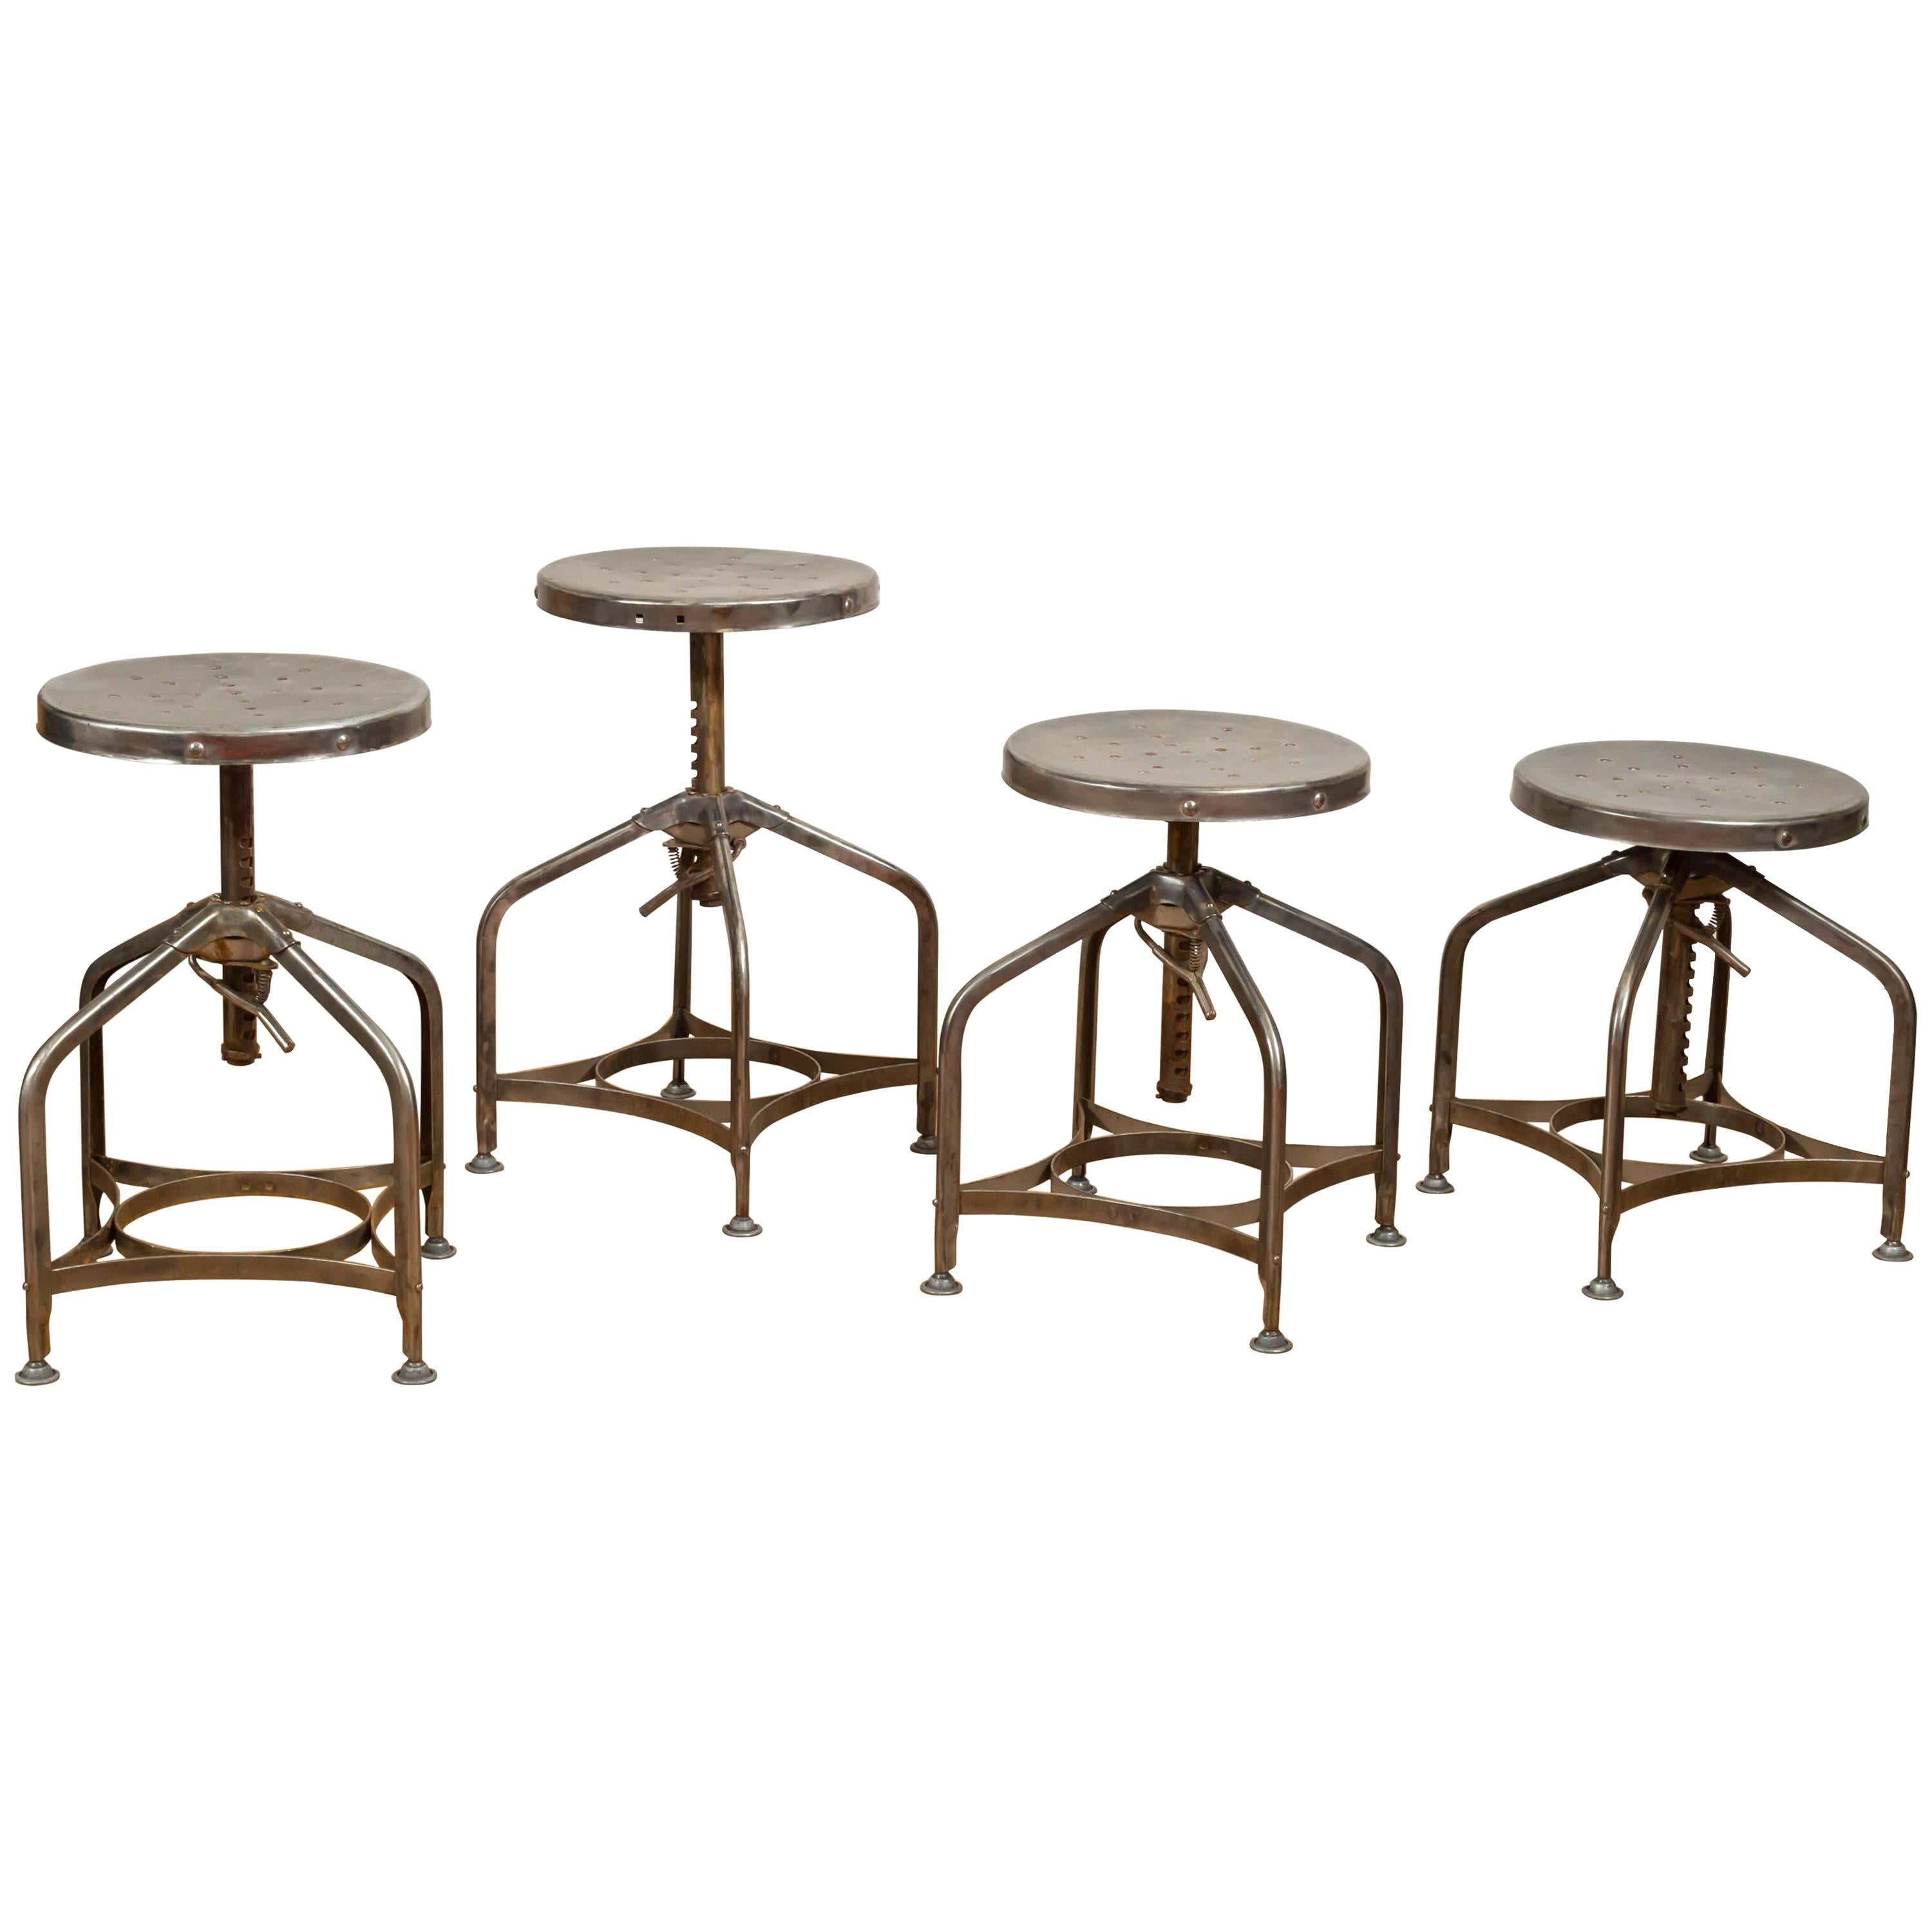 Industrial Steel Swivel Stools by Clement Uhl for Toledo Metal Manufacturing Co